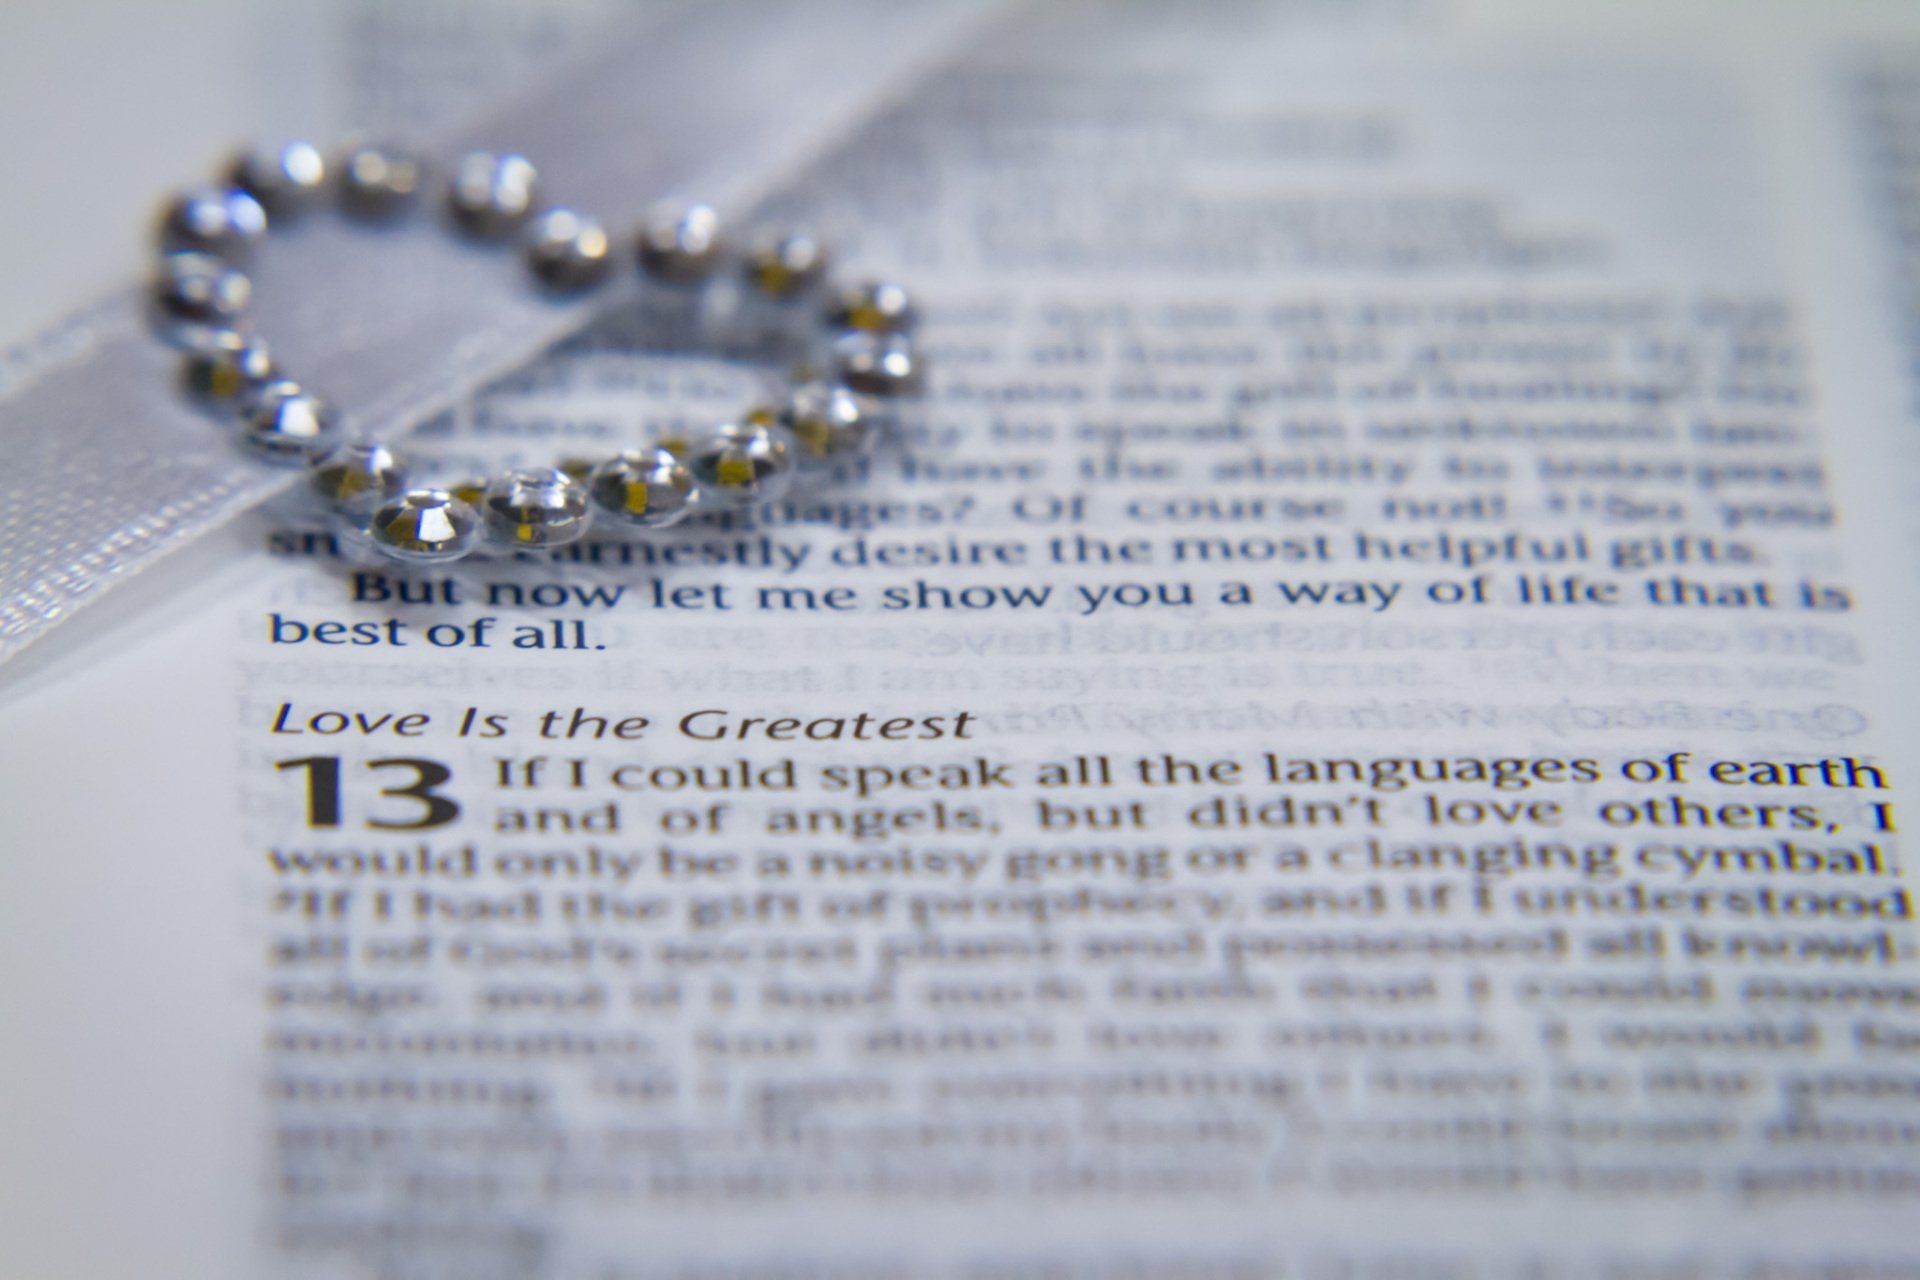 An image of a wedding pendant on a bible opened to a particular wedding verse